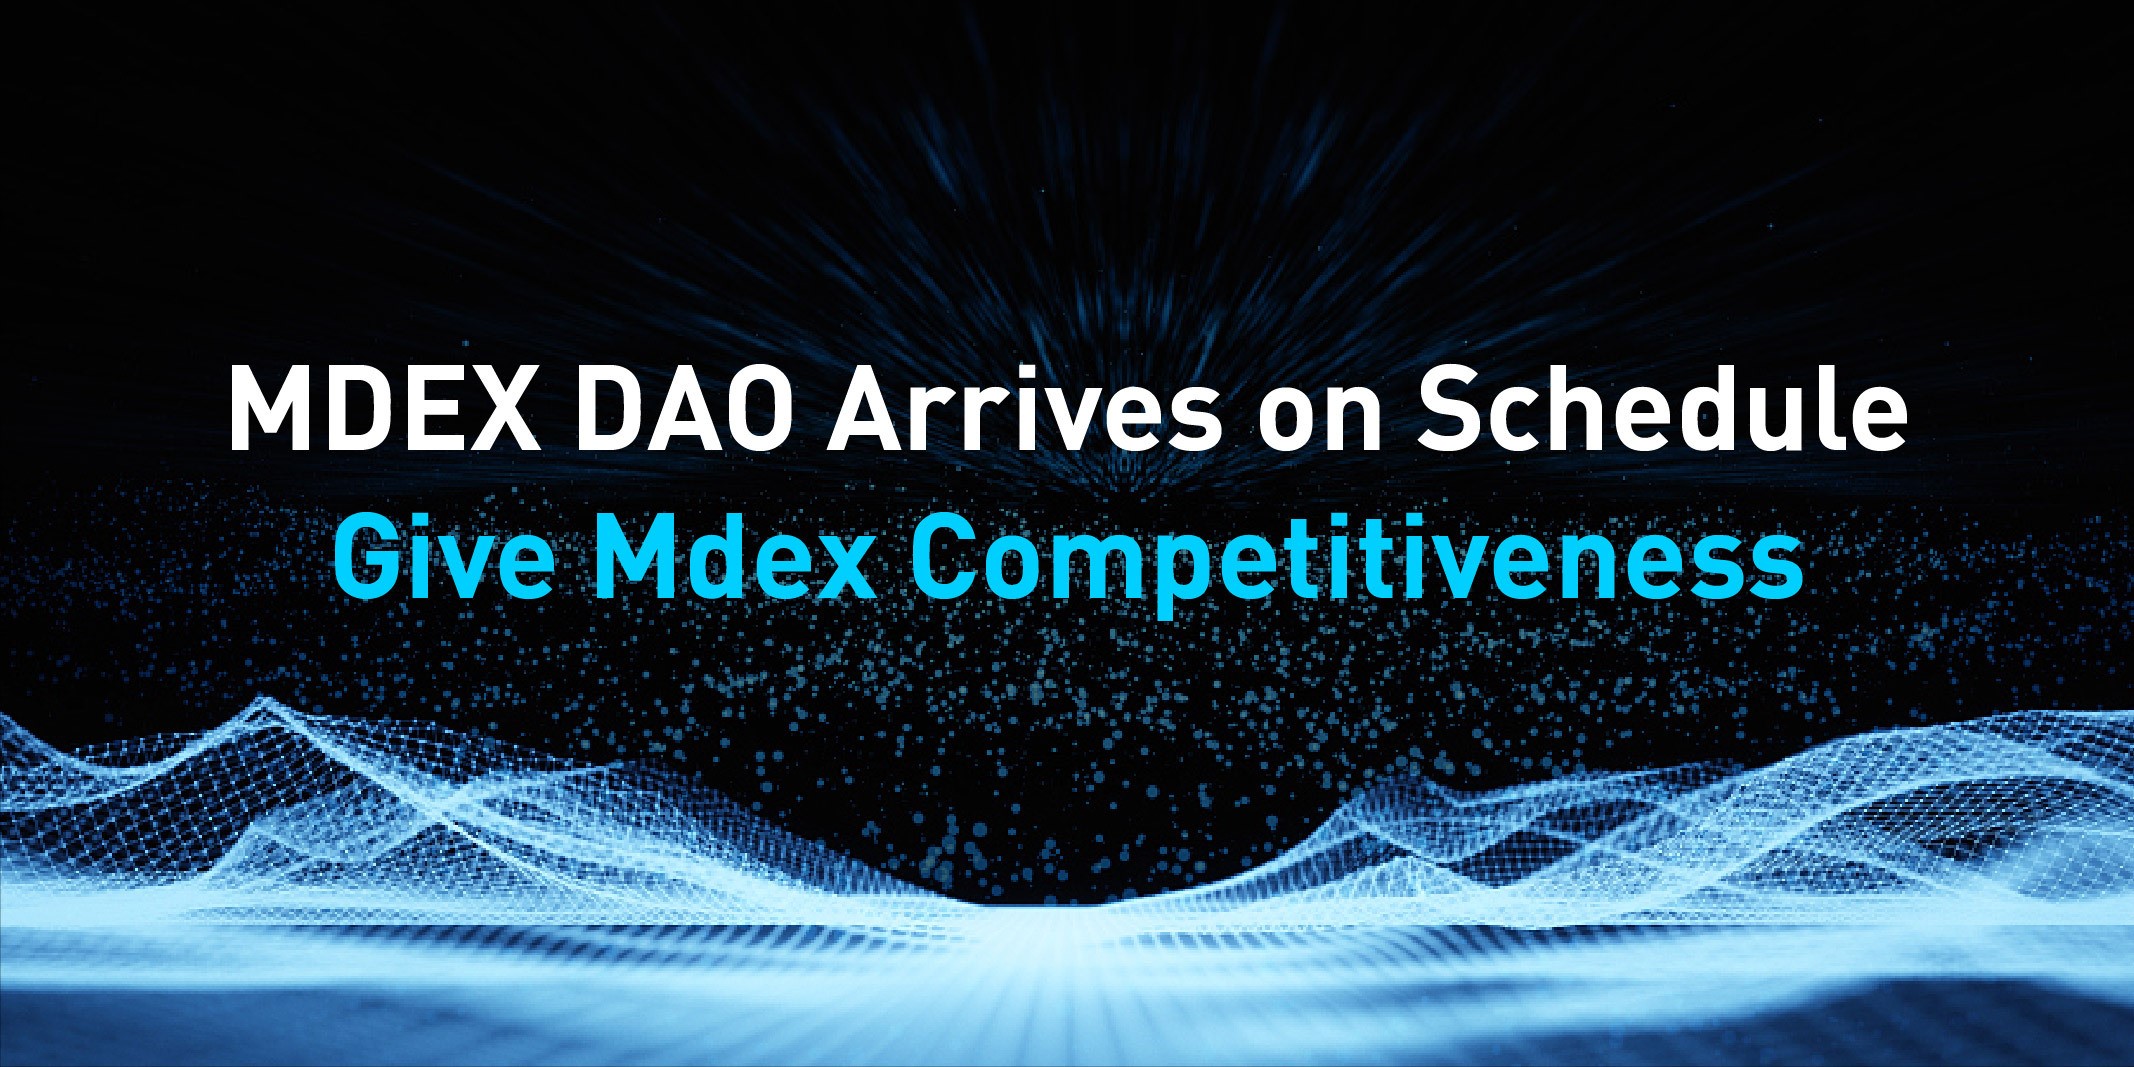 Mdex DAO Arrives on schedule Give Mdex Competitiveness